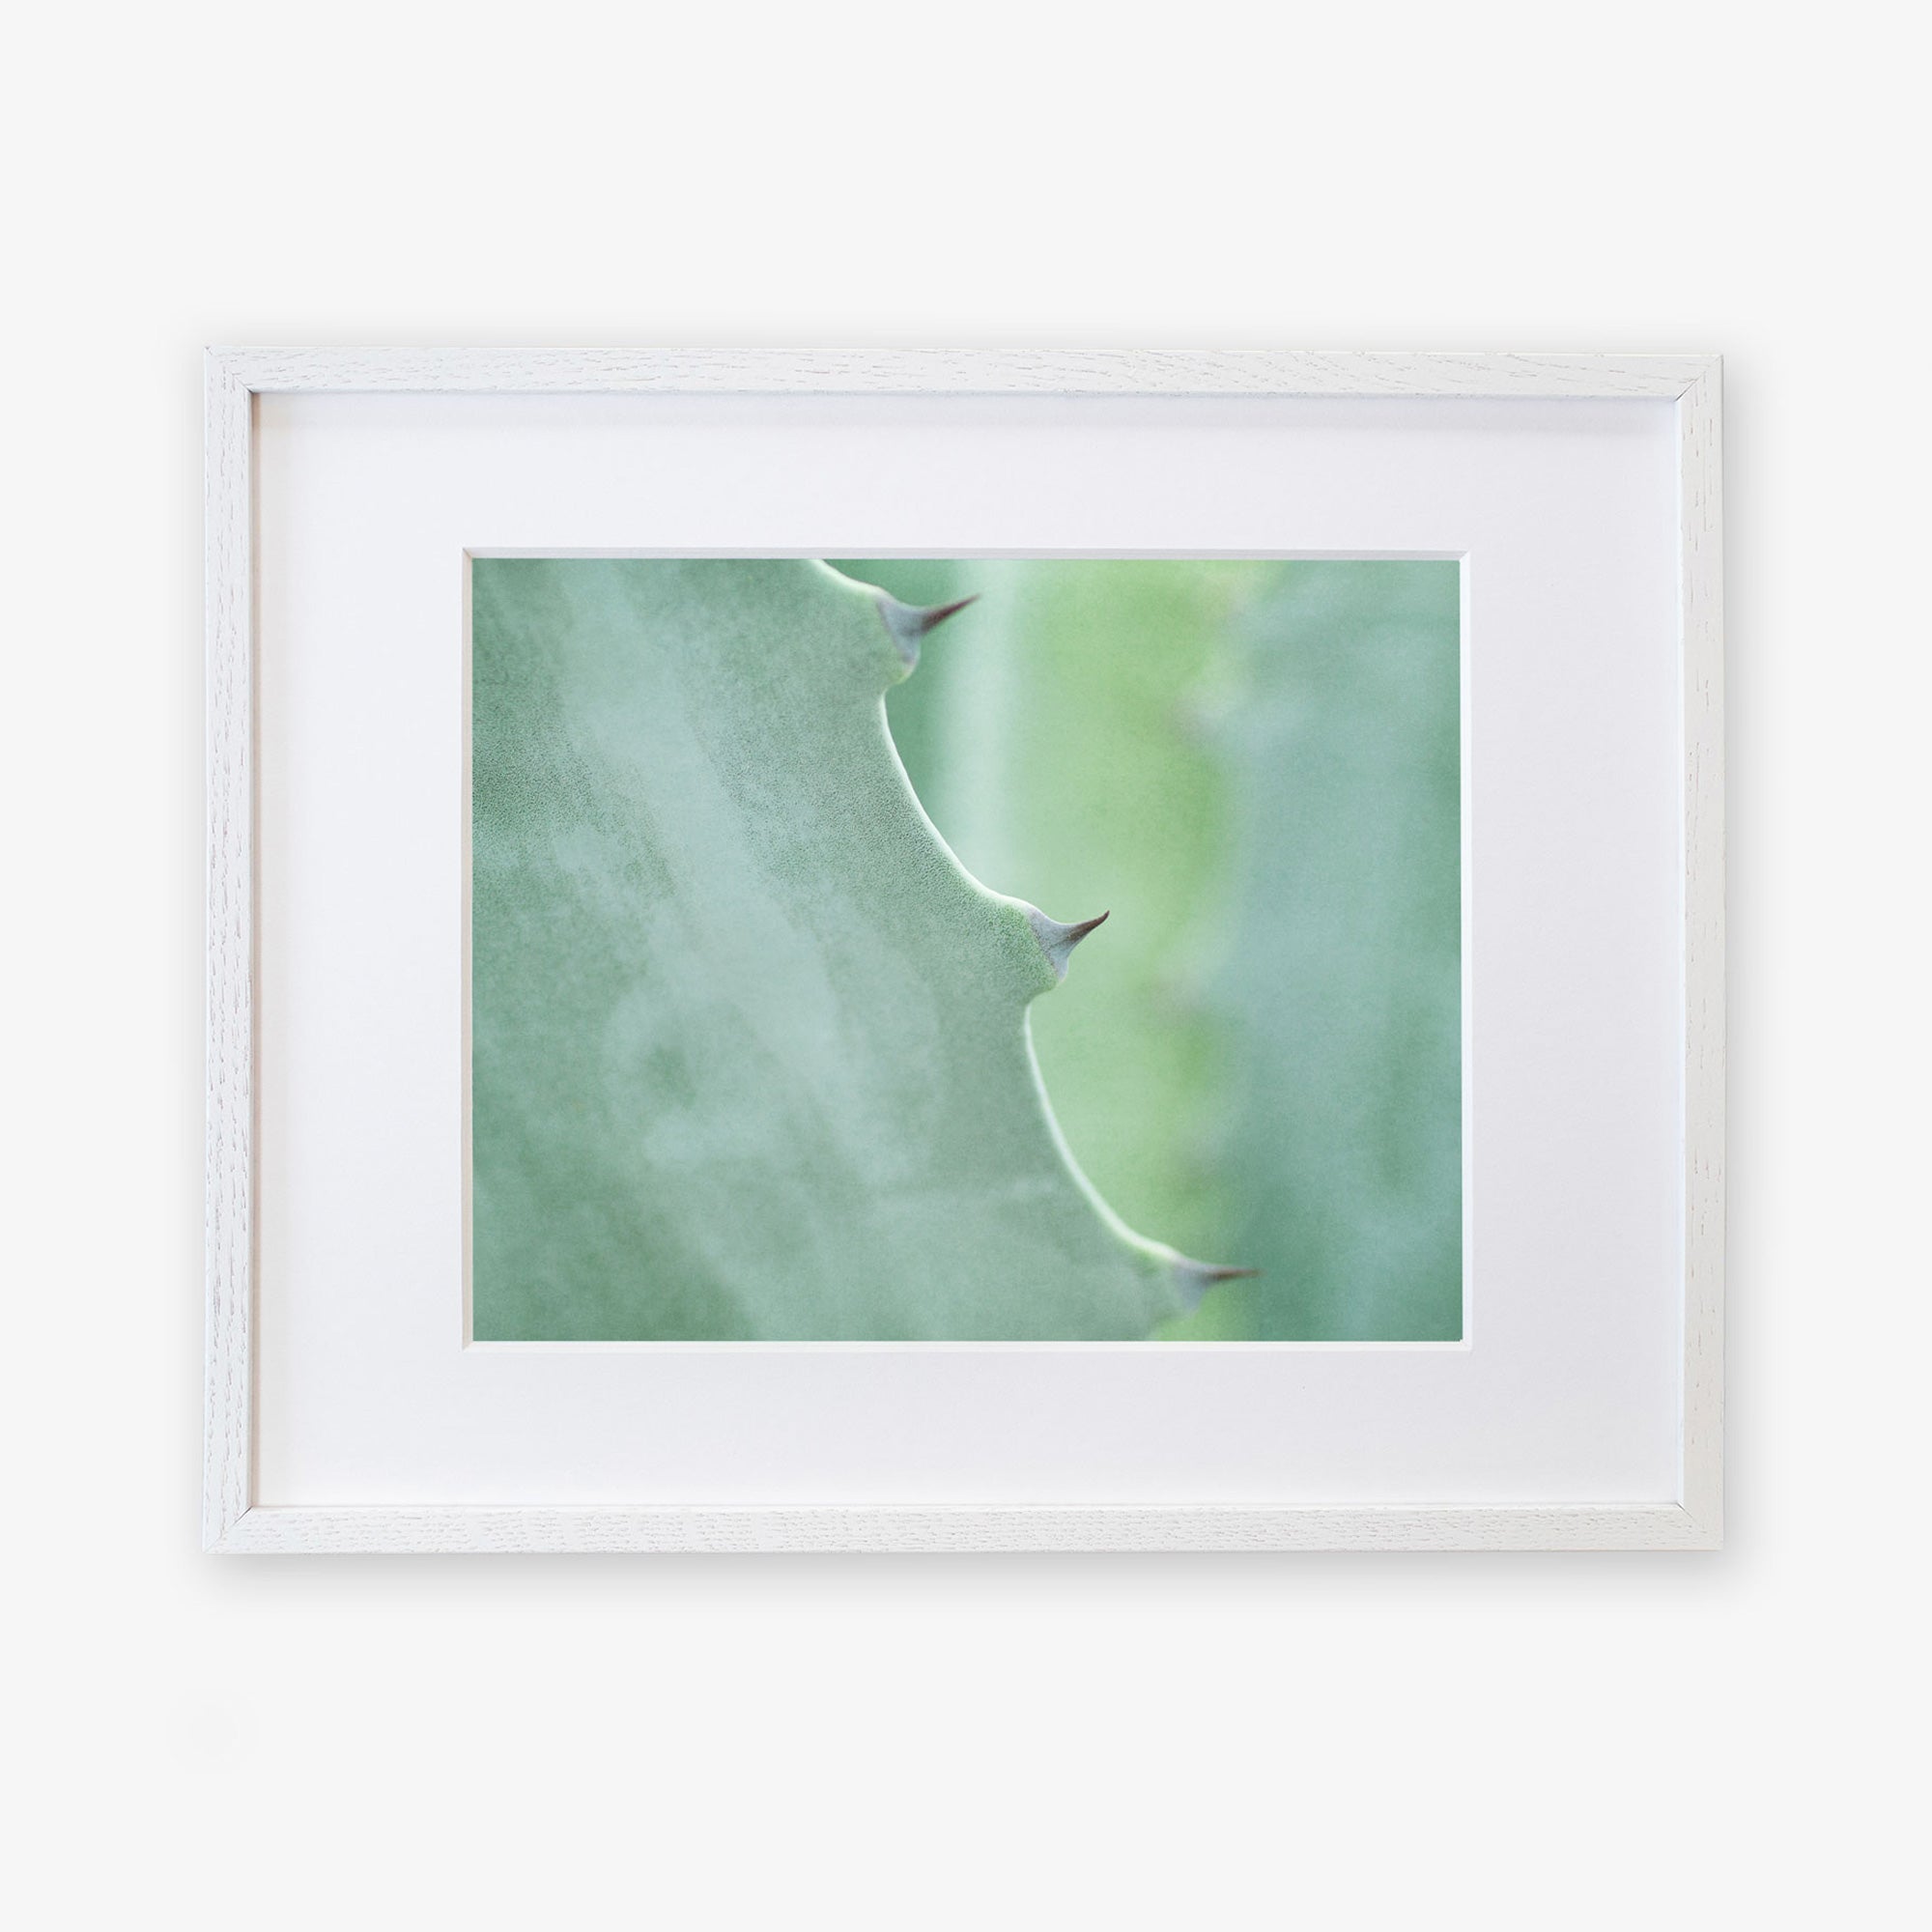 A close-up photo of an Offley Green Mint Green Botanical Print, &#39;Aloe Vera Spikes&#39; leaf, showing its green surface and thorny edges, printed on archival photographic paper against a white background.